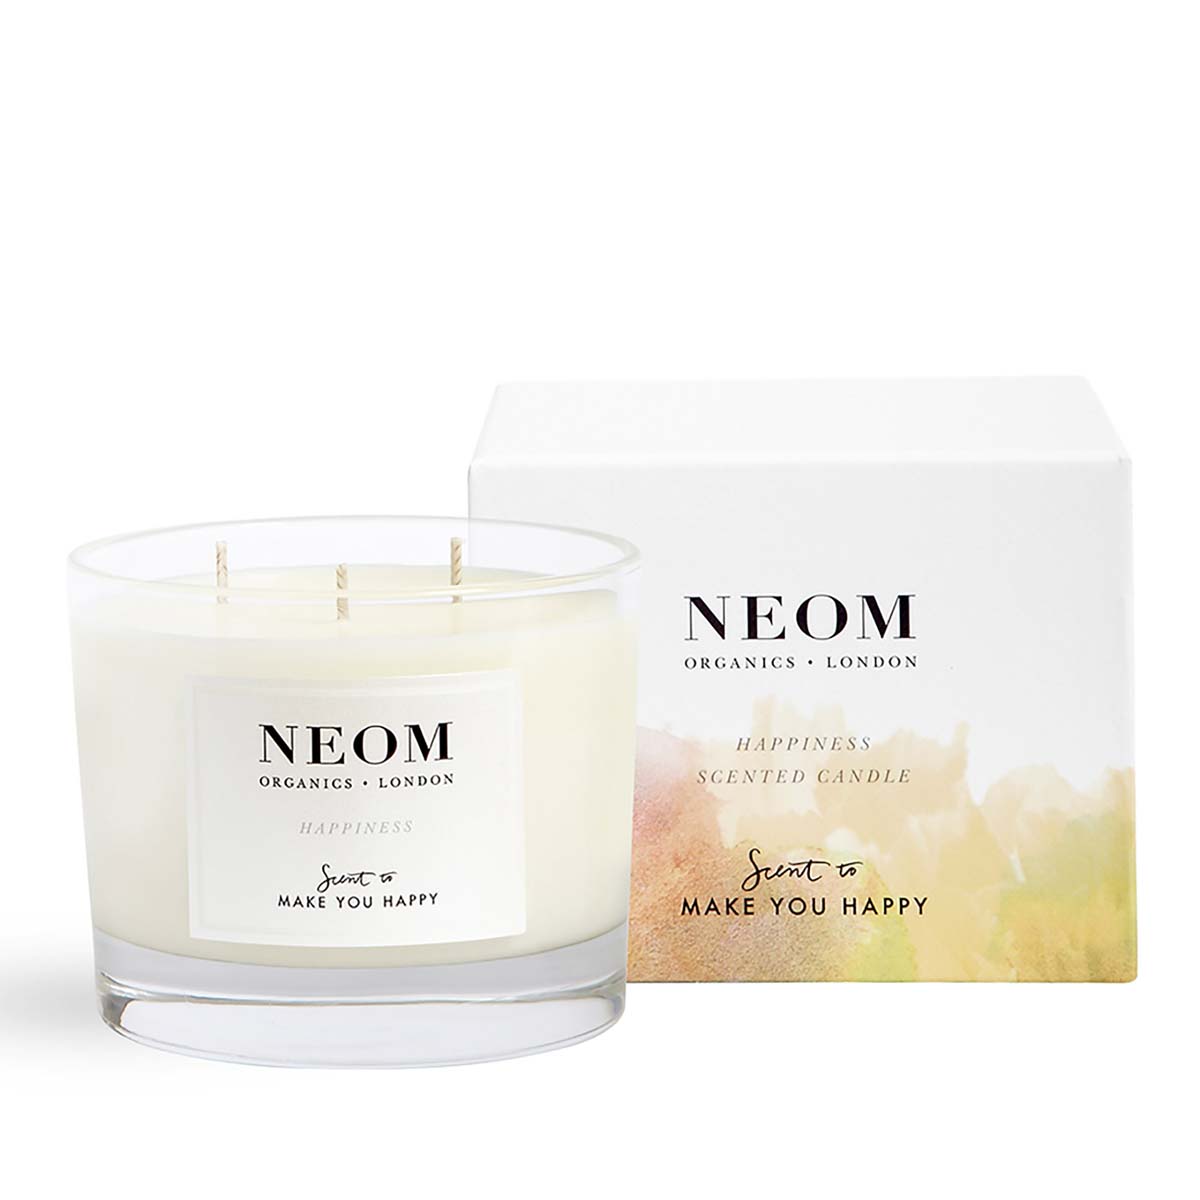 Neom Happiness Scented Candle (3 Wicks) 420G